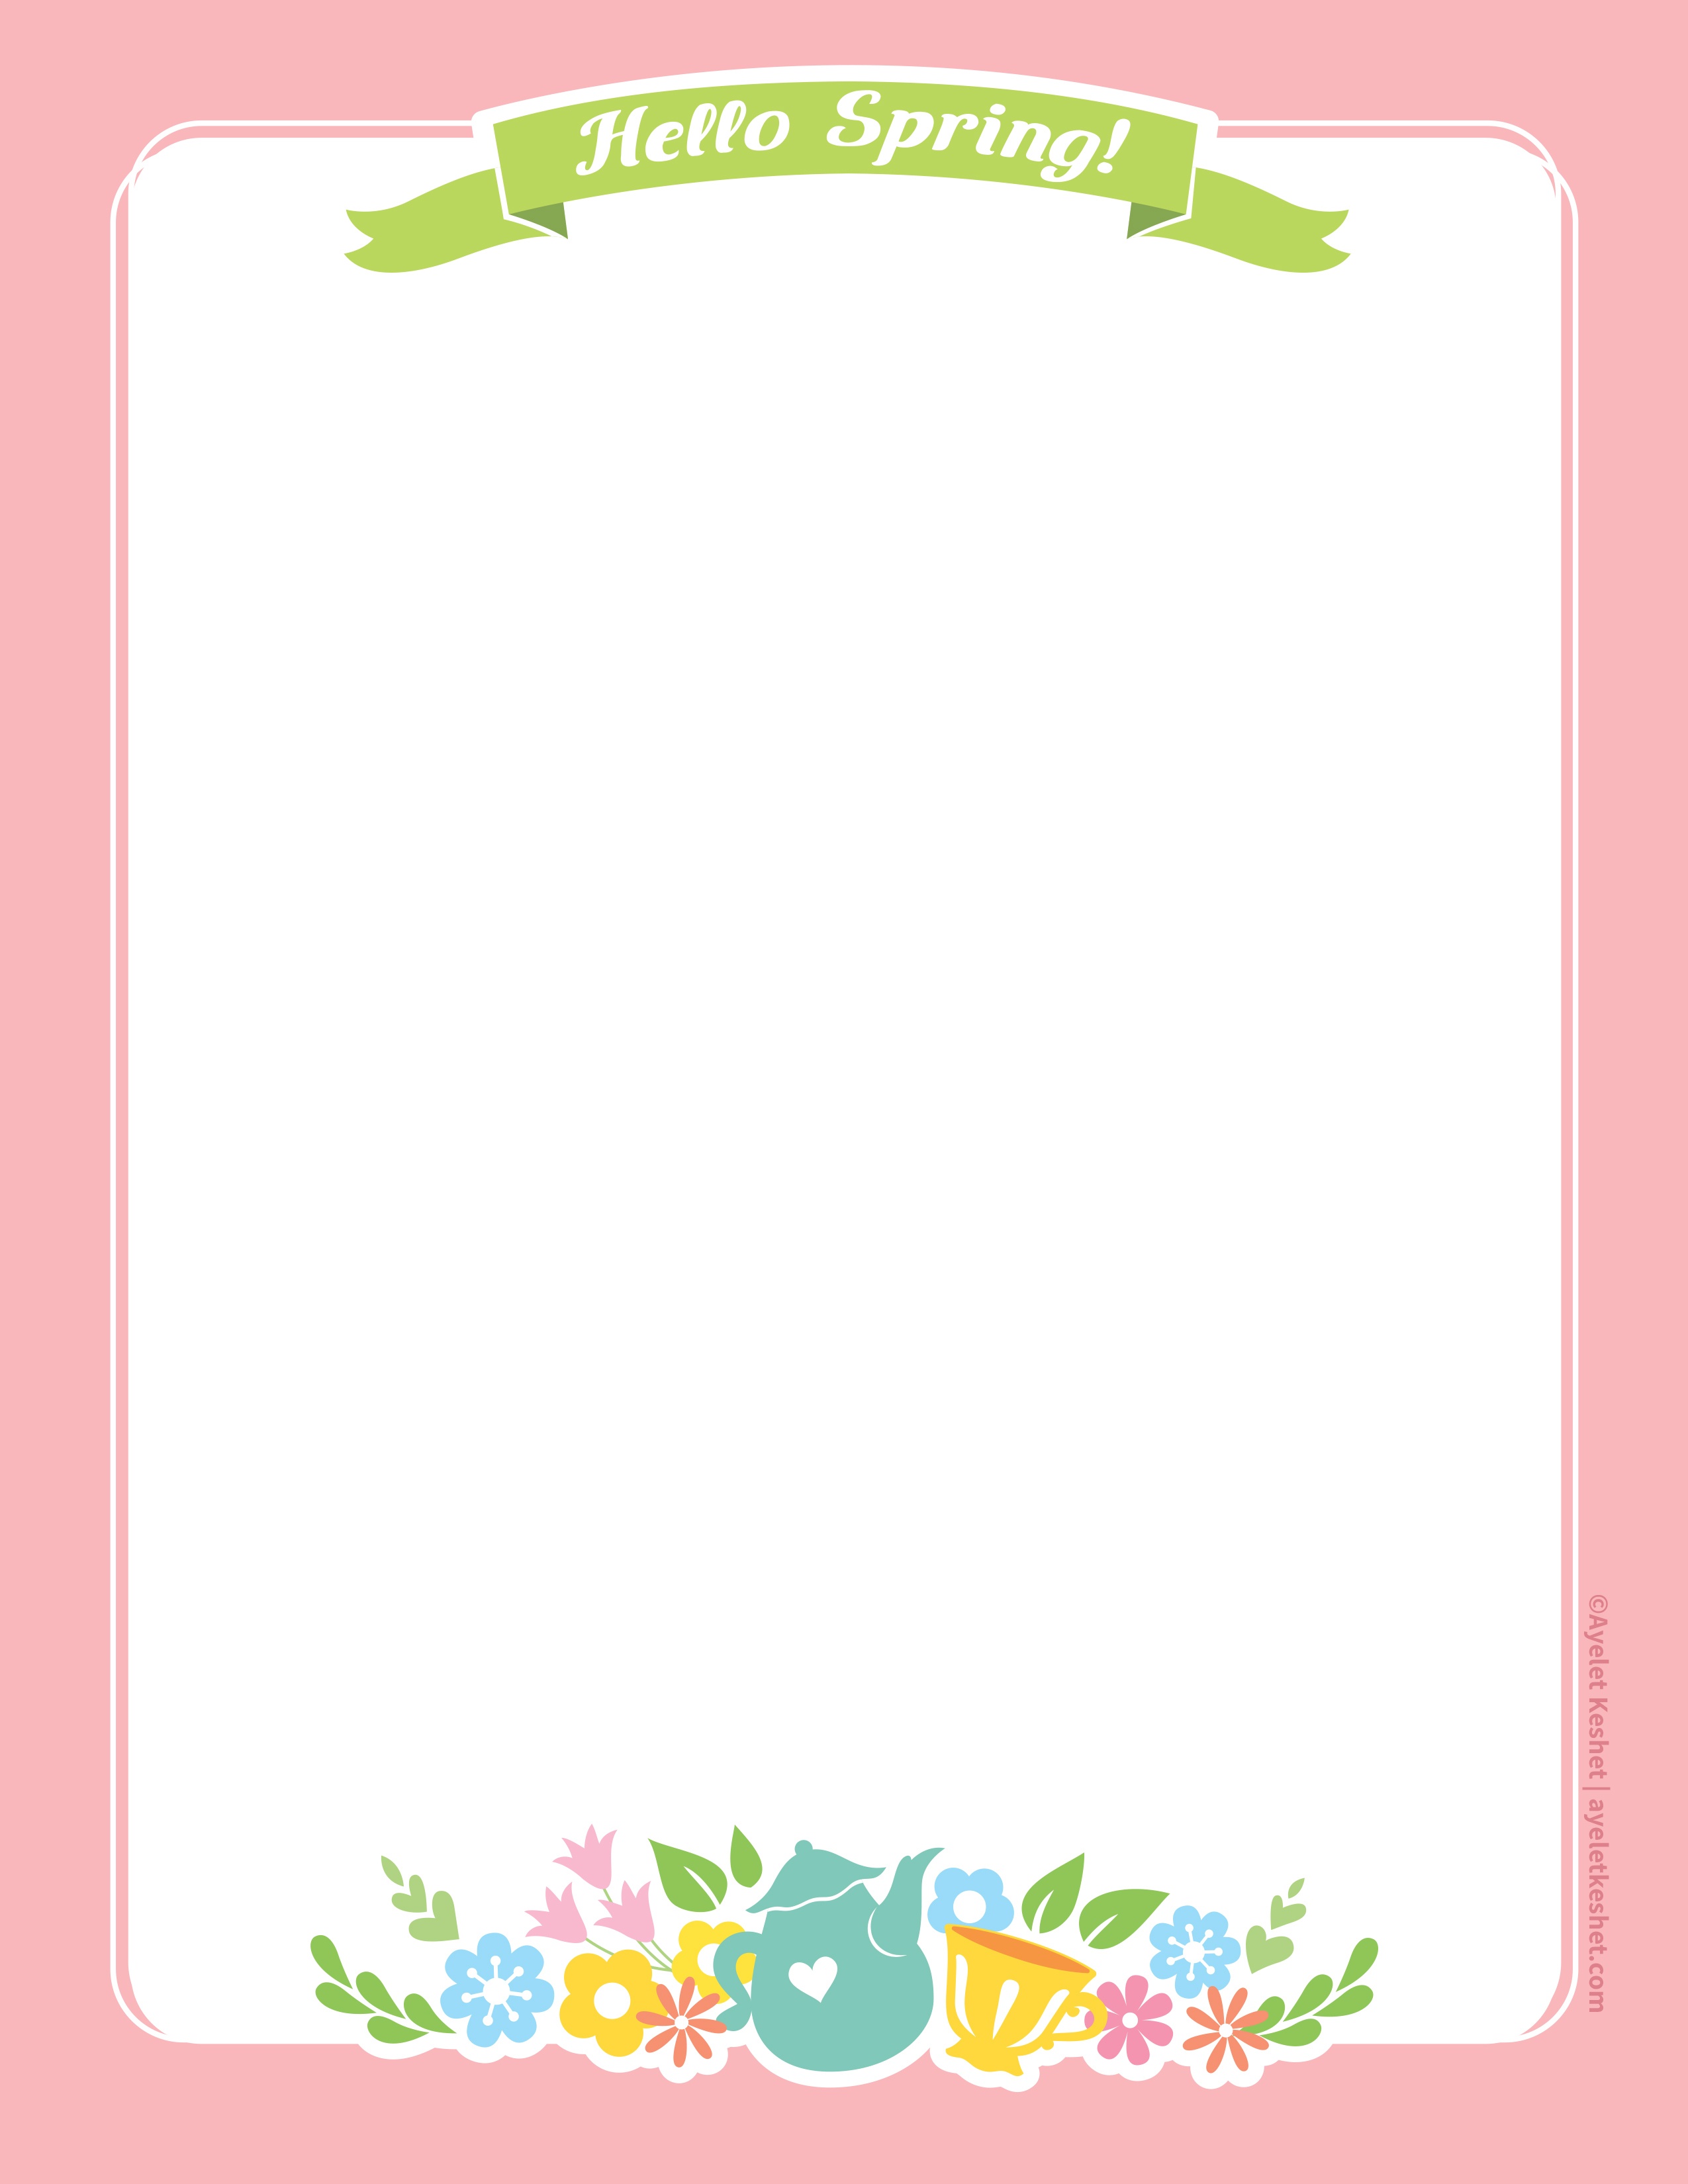 Lovely Free Printable Stationery Paper For Spring - Ayelet Keshet - Free Printable Stationery